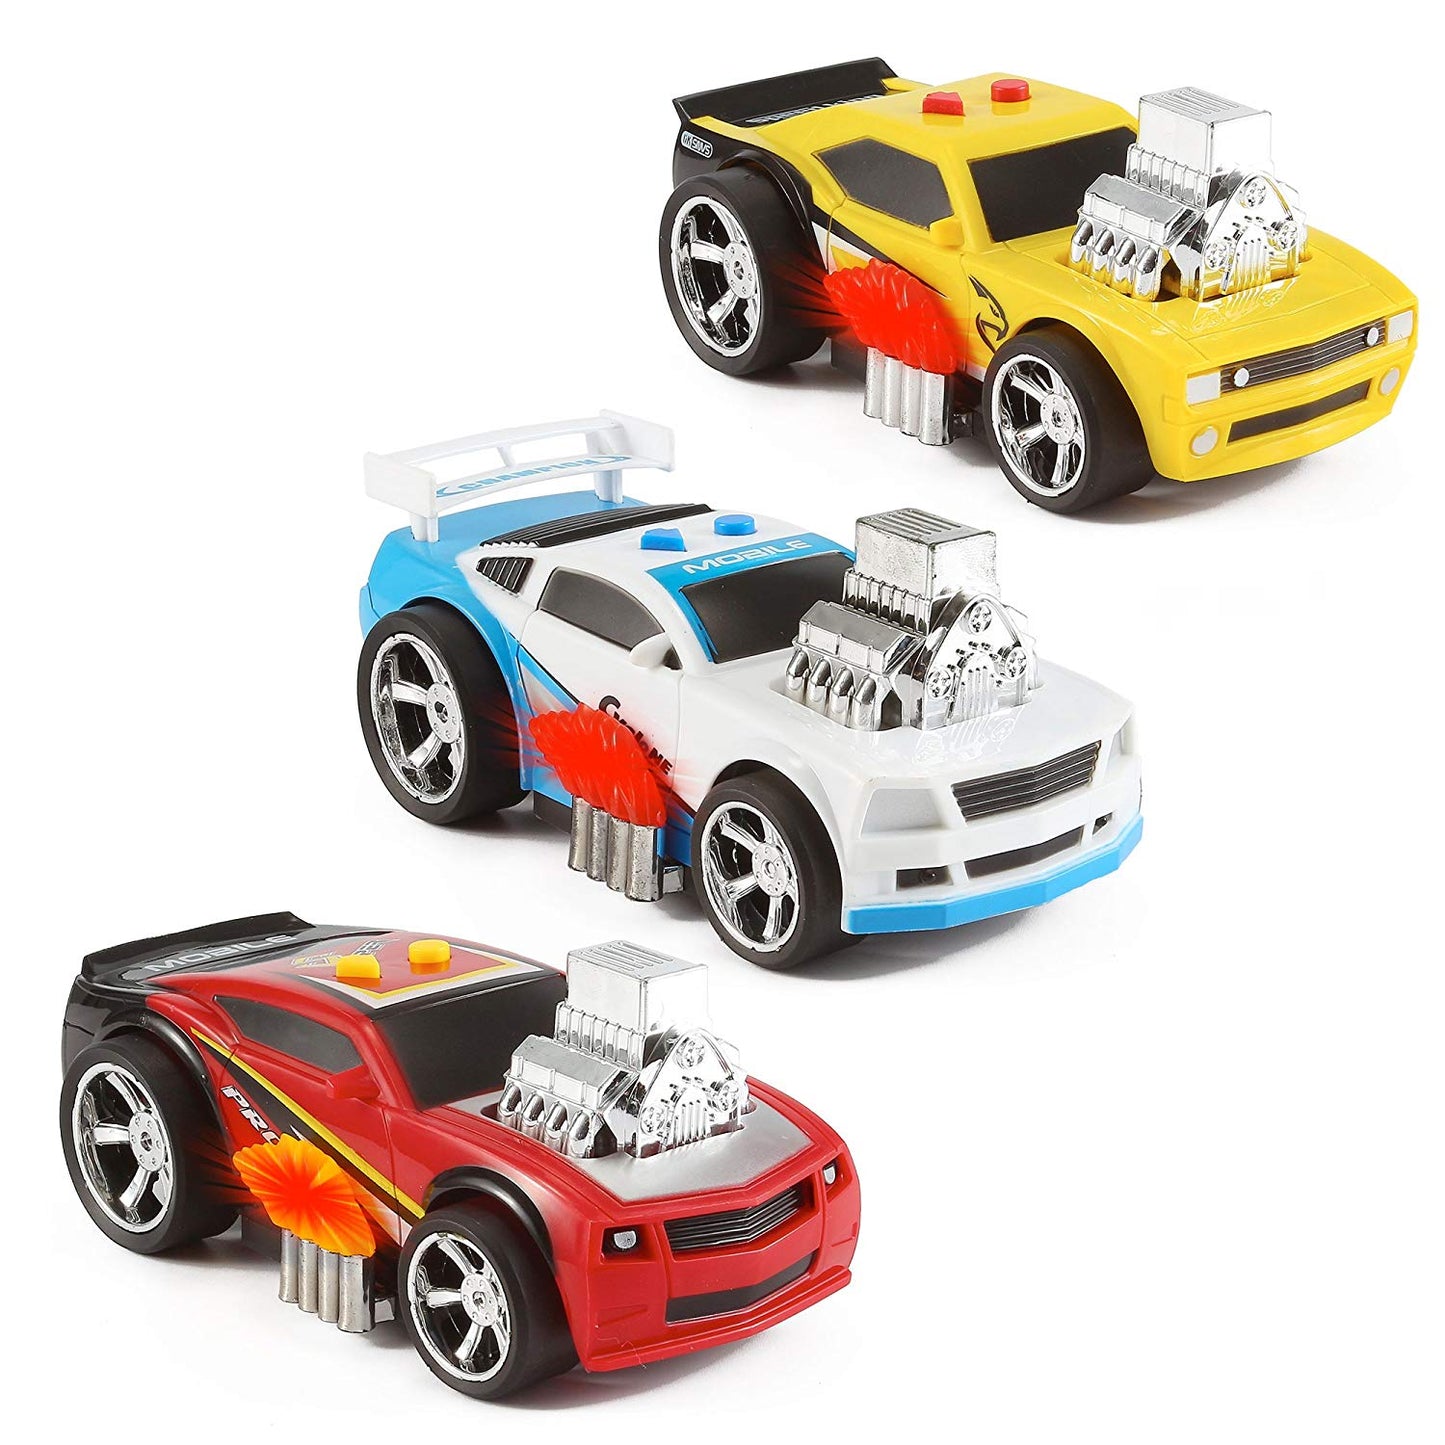 3-in-1 True Hero Vehicles Kids Toy Cars PlaySet | 3-Button LED Light & Sound Effects (Emergency Vehicles)